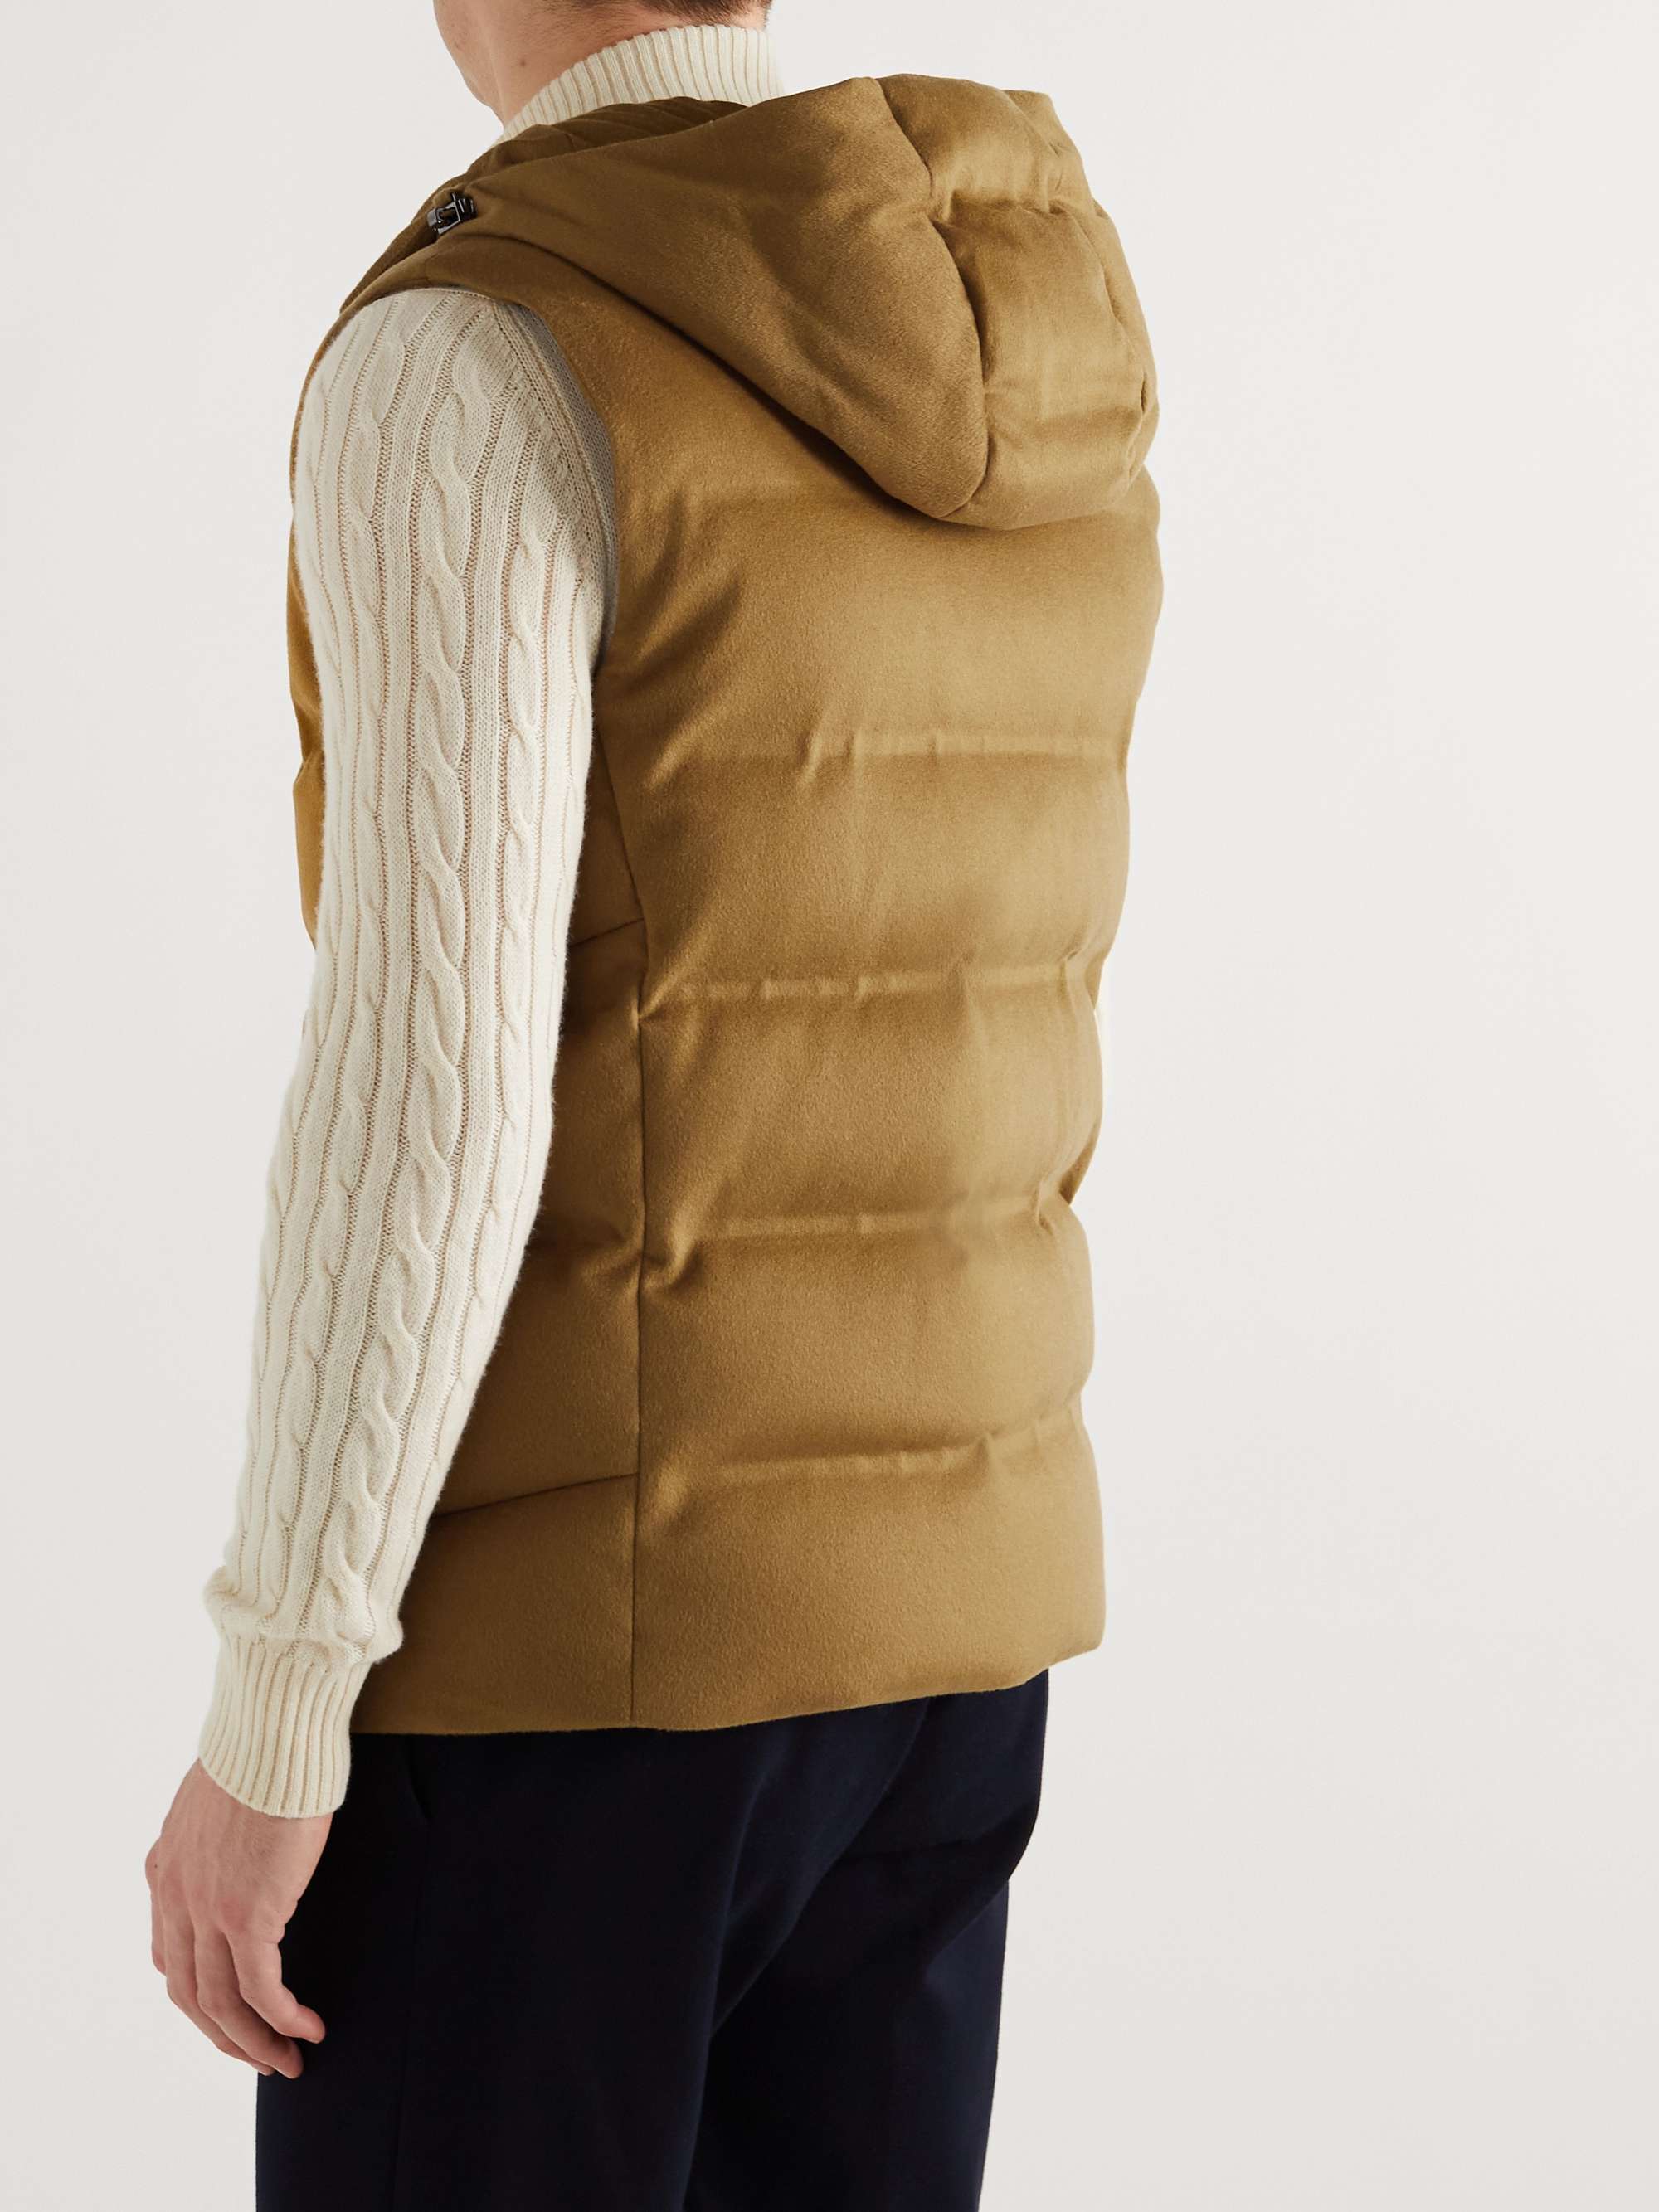 LORO PIANA Fillmore Slim-Fit Quilted Storm System Shell Hooded Down Gilet